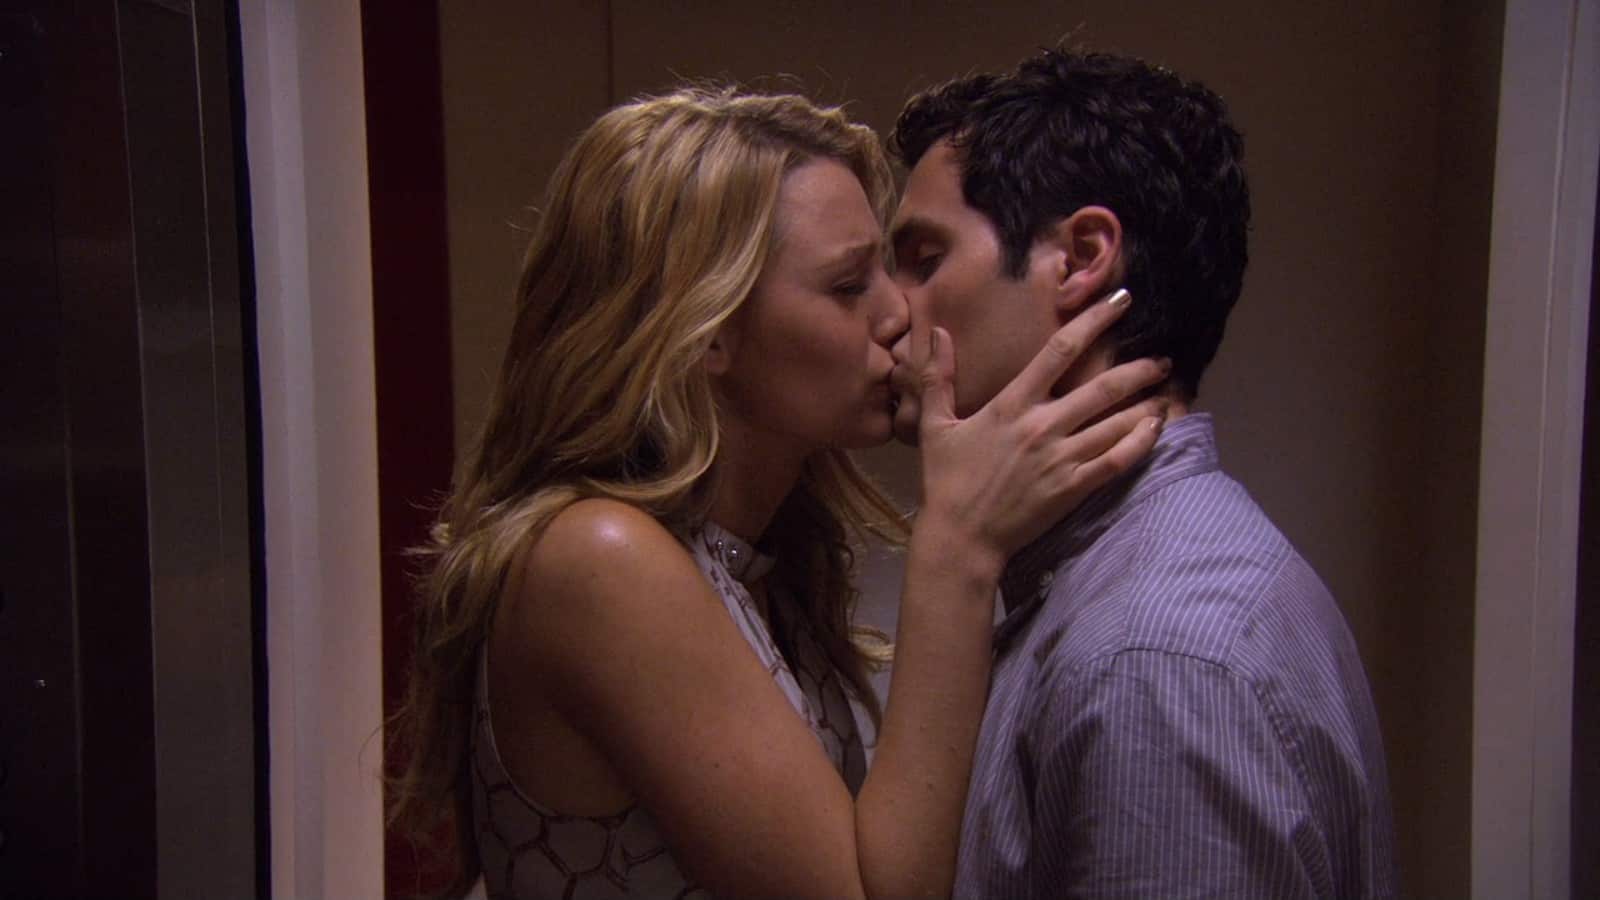  A girl tearfully kisses a boy in an elevator in this image from Warner Bros. Television.